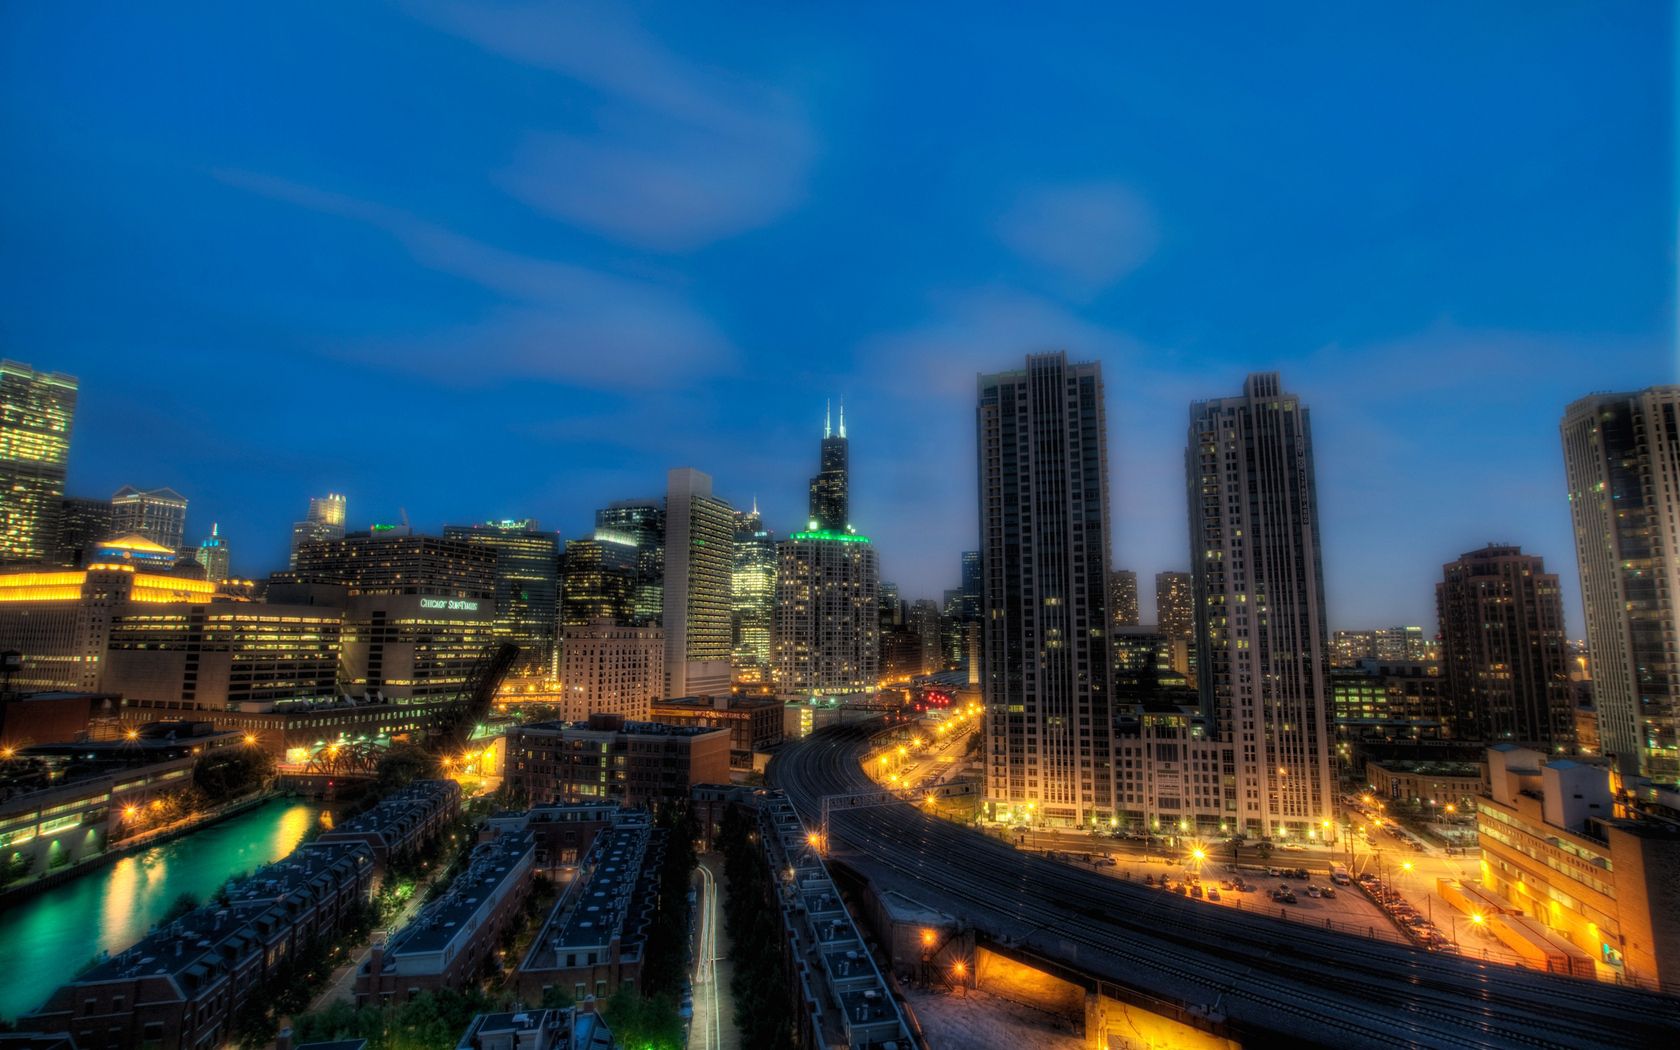 Download PC Wallpaper cities, night, city lights, skyscrapers, hdr, chicago, illinois